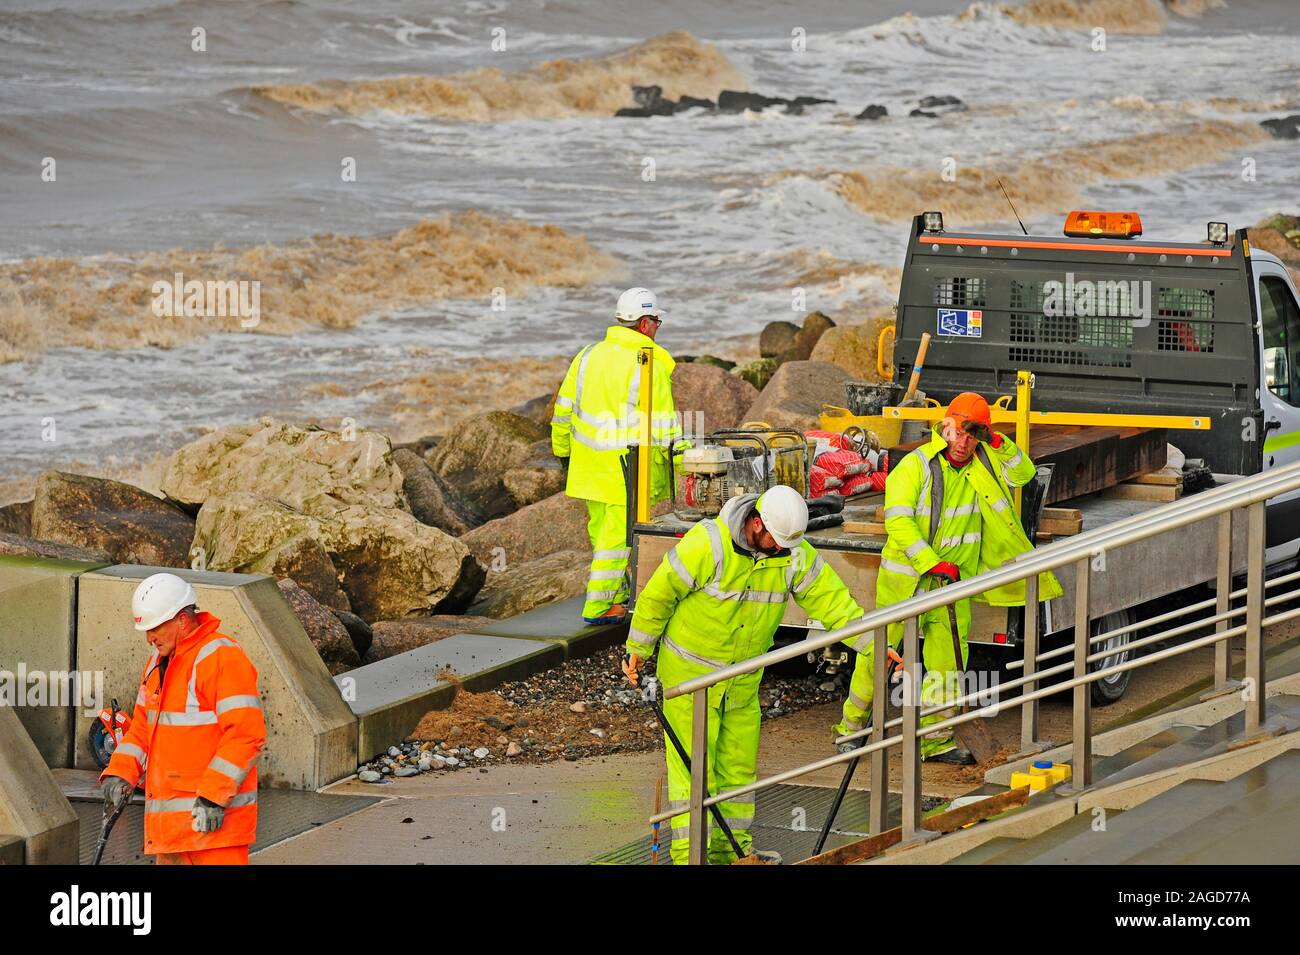 Workers in protective gear cleaning up after severe sea storm at Rossall,Fleetwood,UK Stock Photo